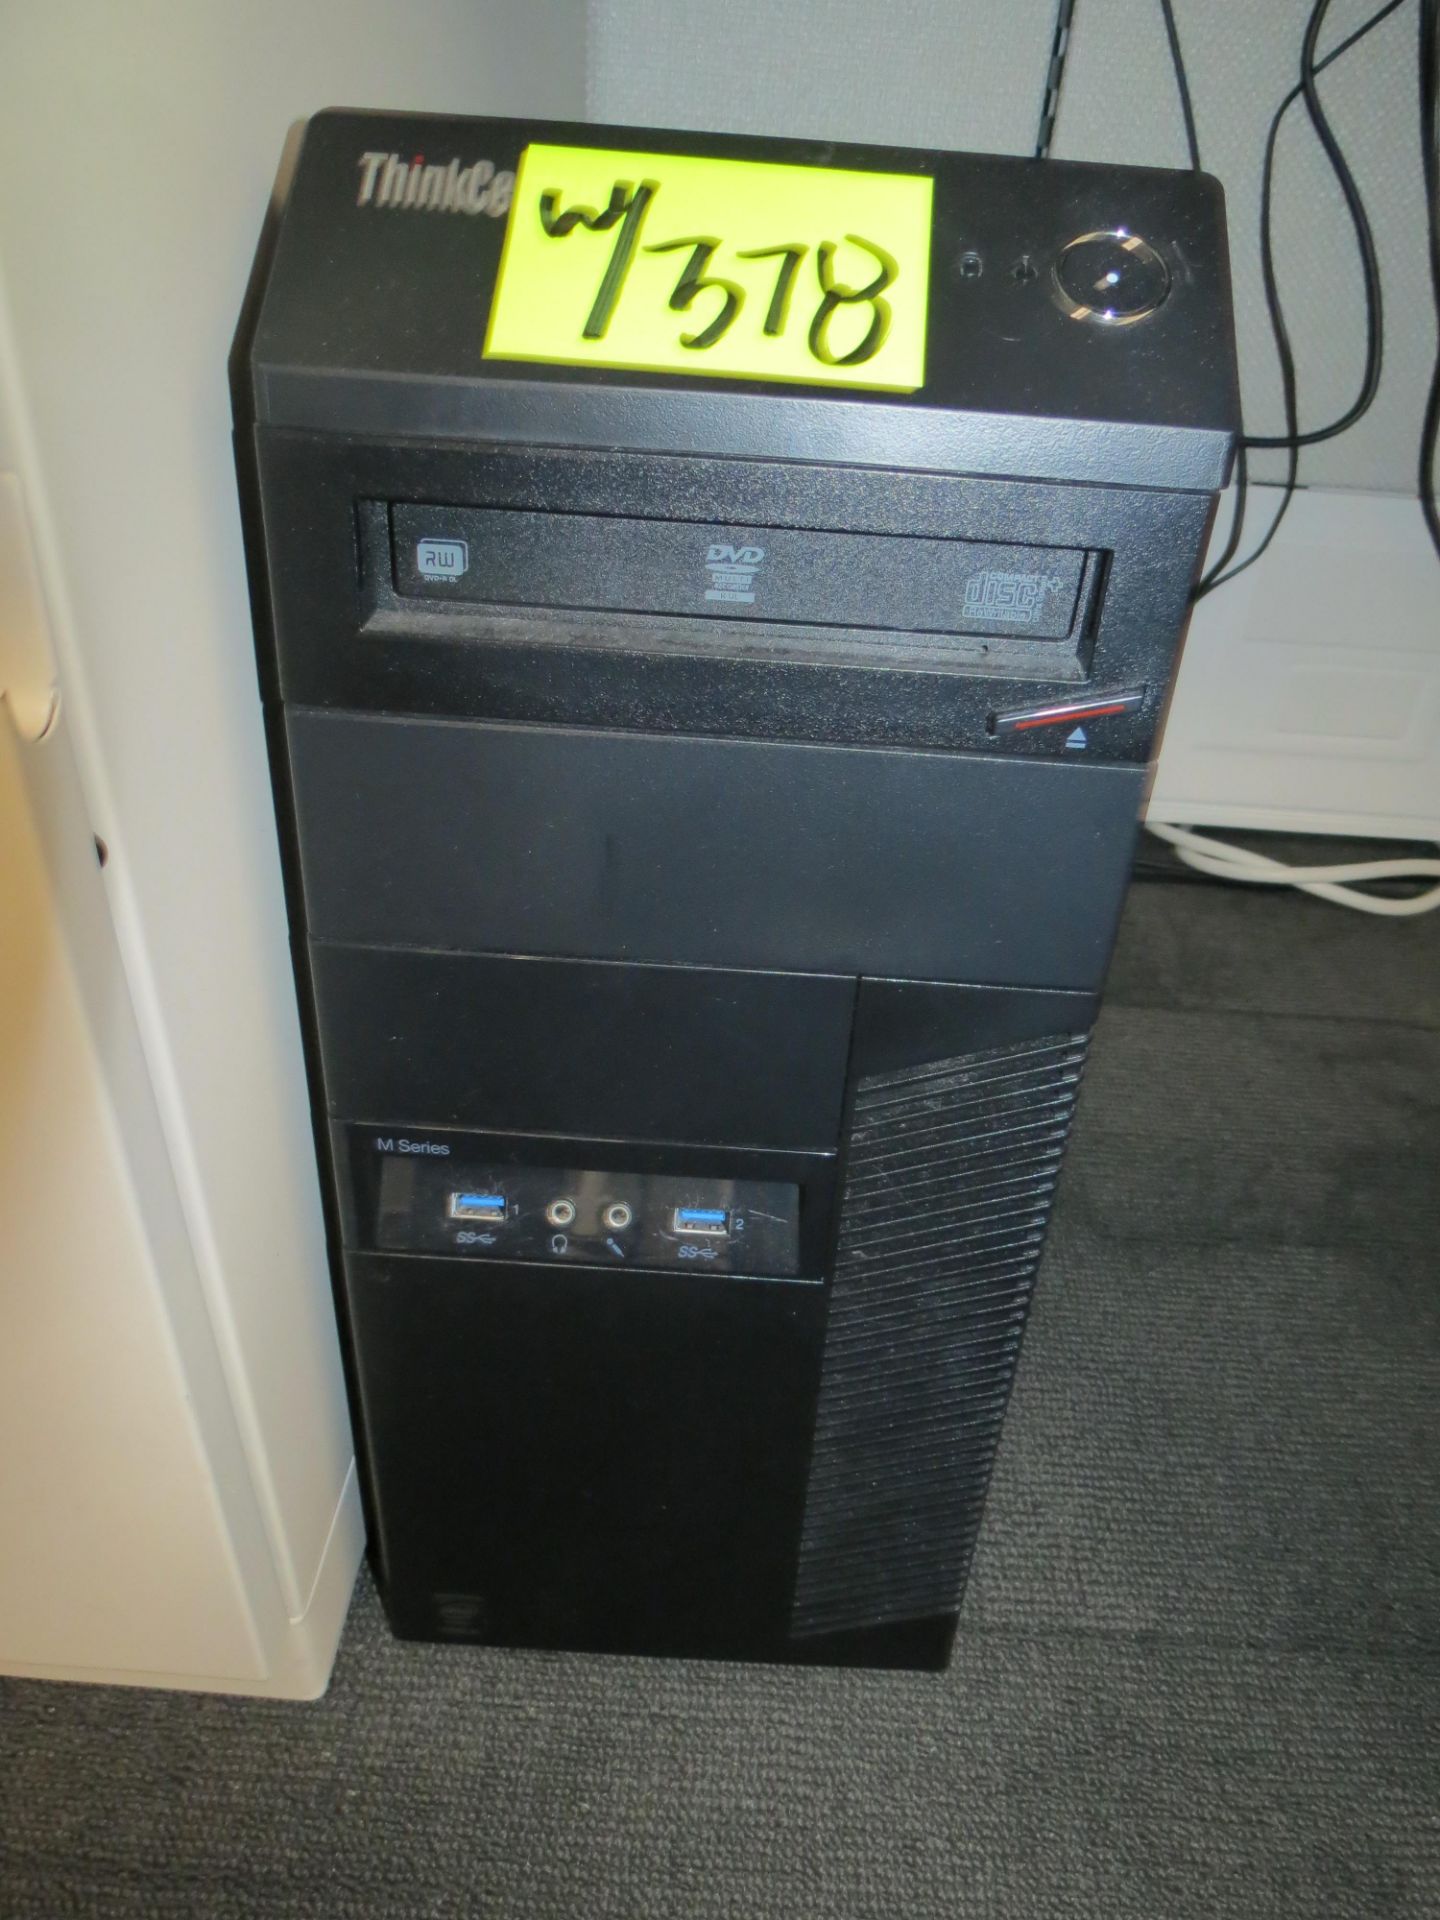 DELL PRECISION TOWER 5810, LENOVO THINKCENTRE TOWER, EATON UPS POWER SUPPLY, APC UPS POWER SUPPLY, 3 - Image 4 of 5